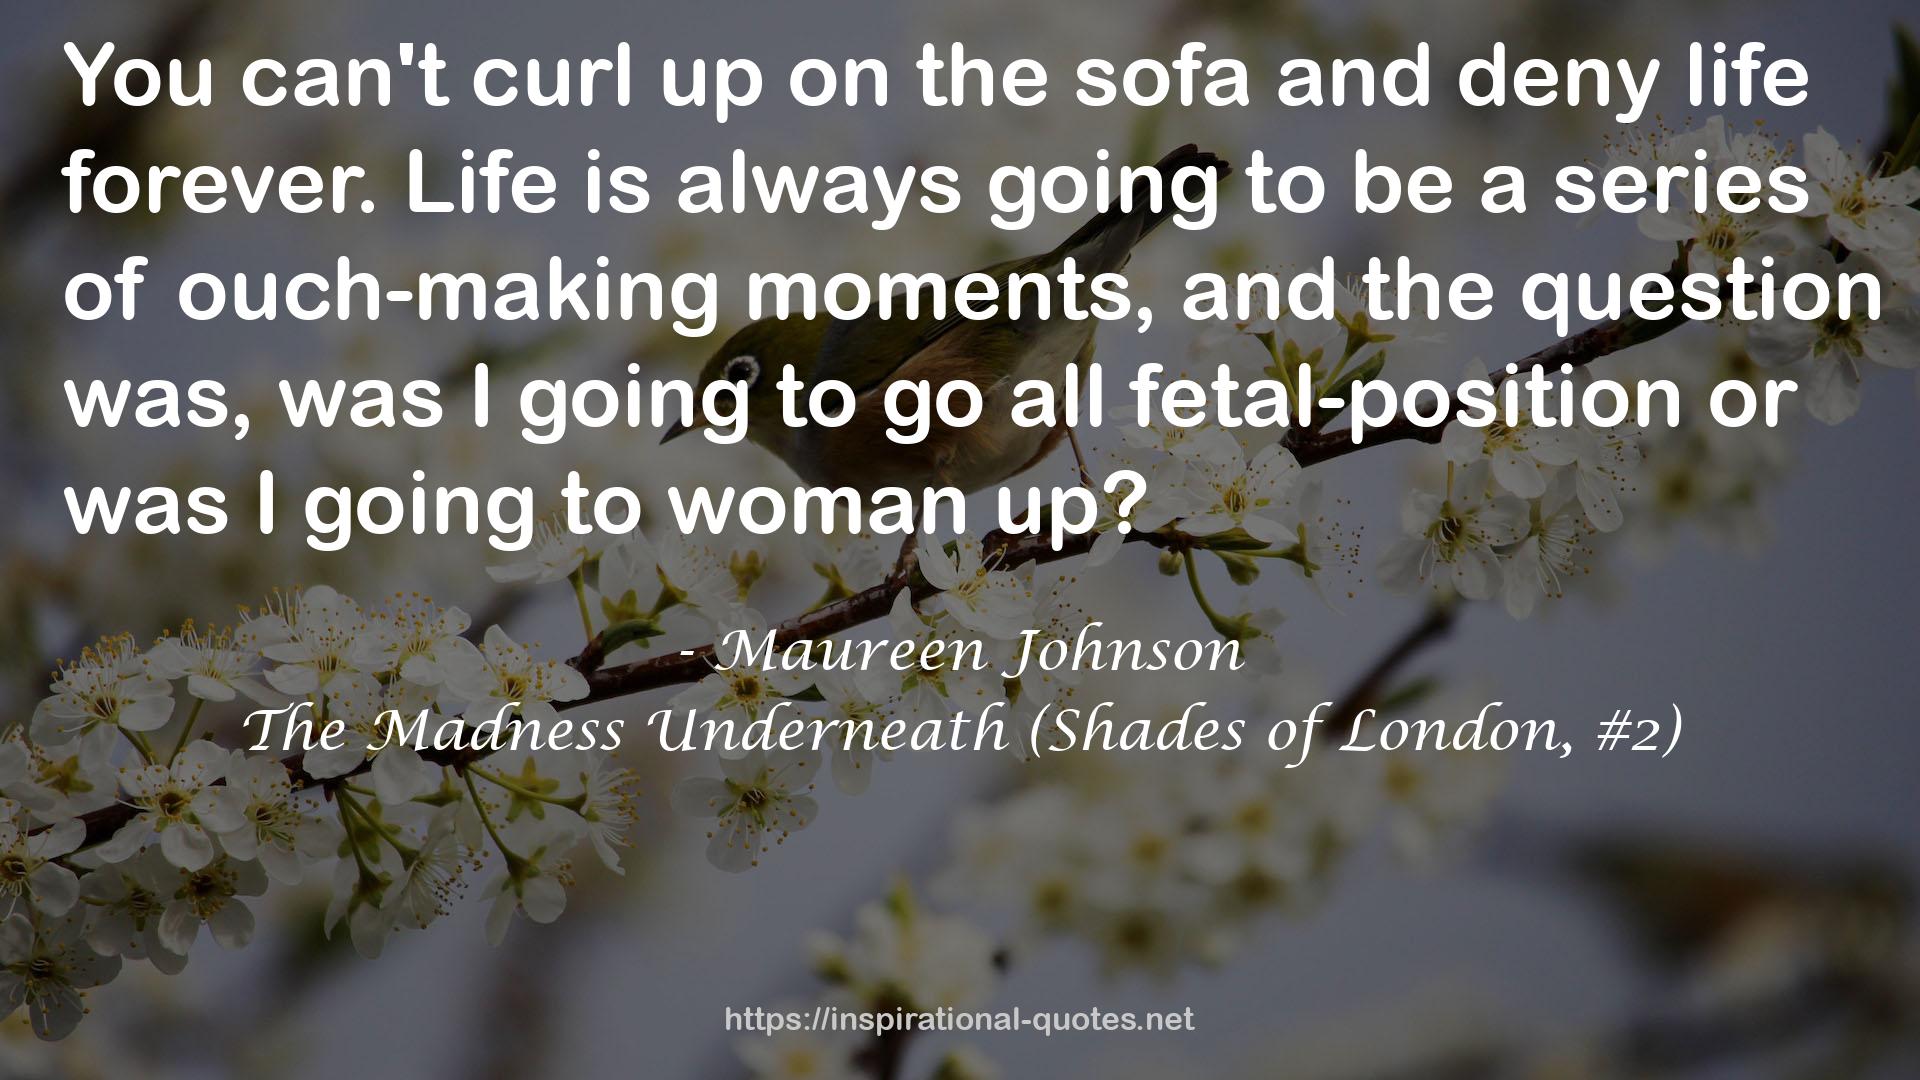 The Madness Underneath (Shades of London, #2) QUOTES